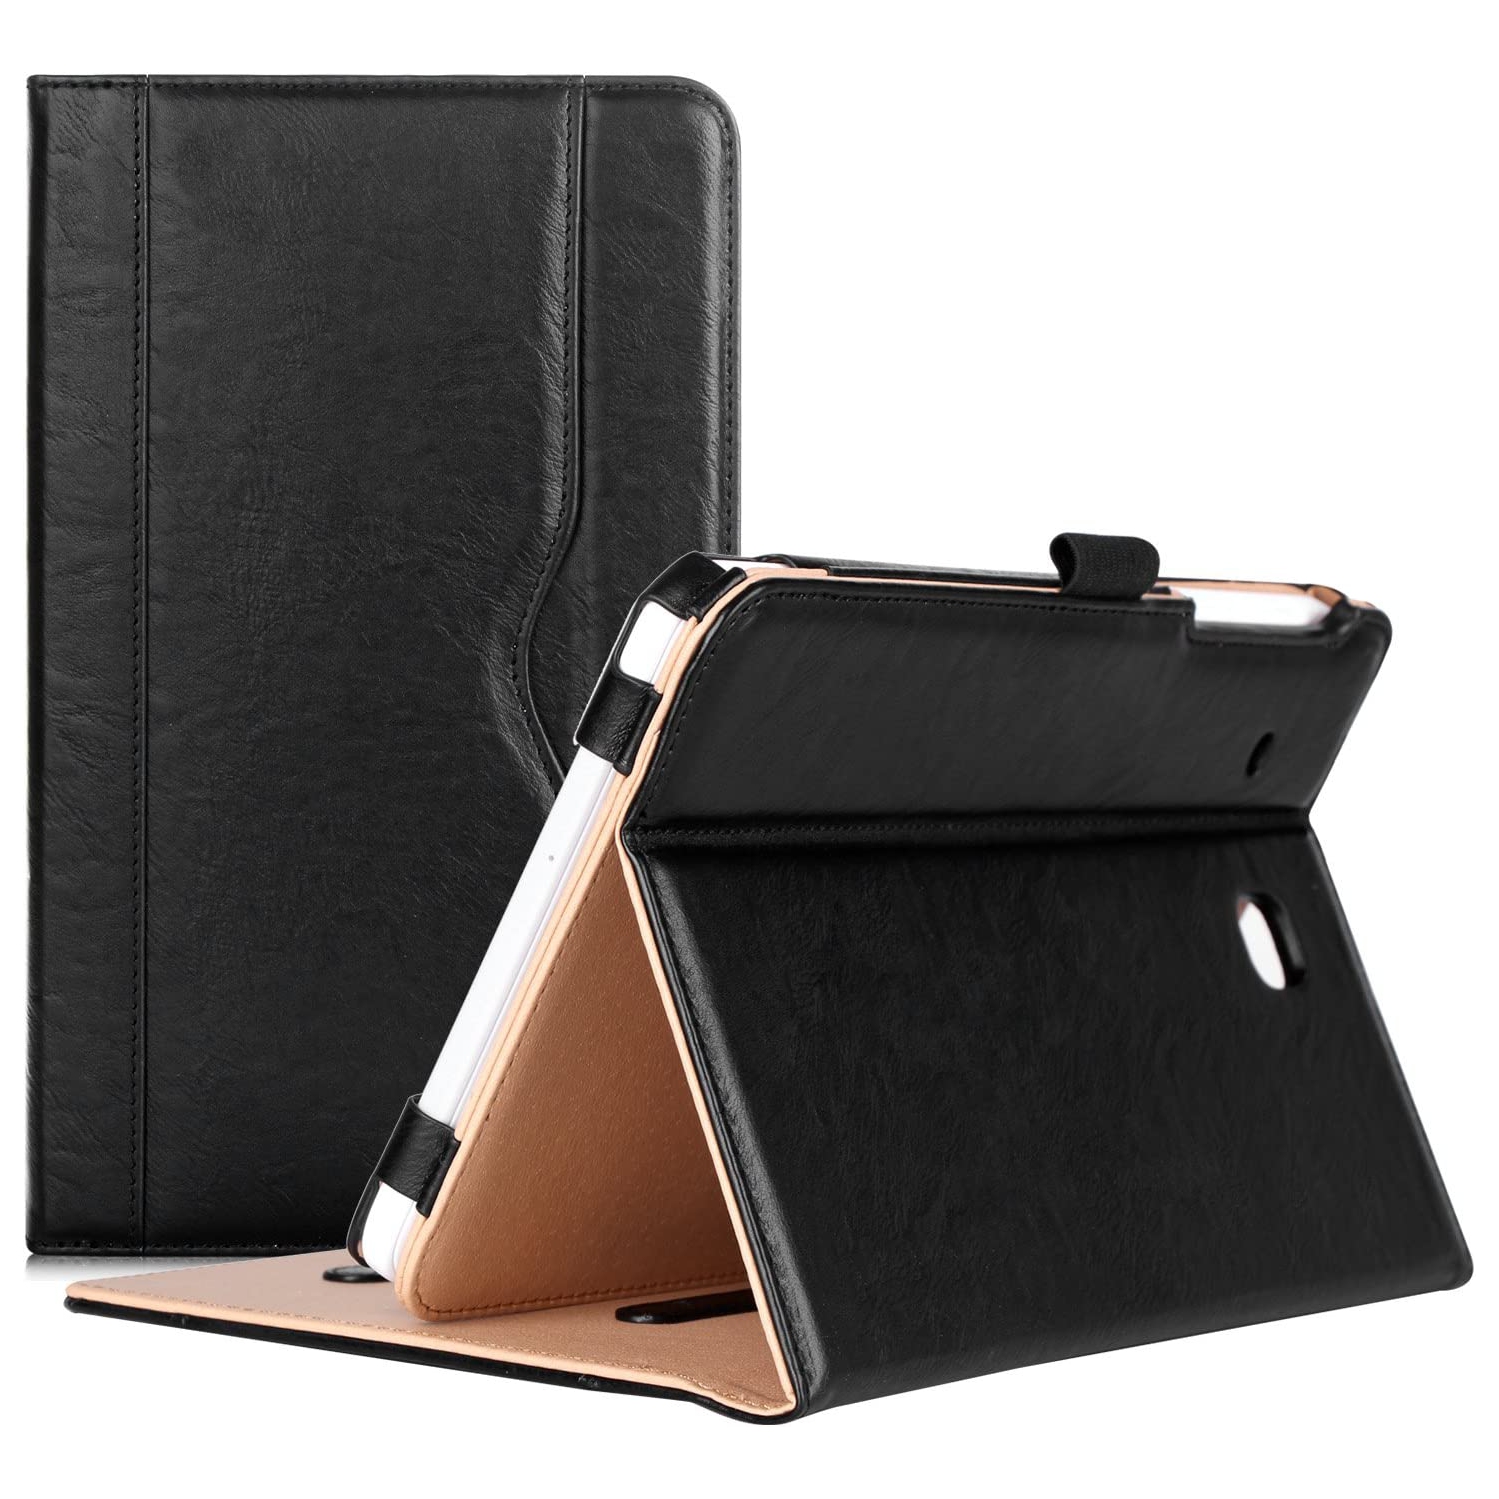 Samsung Galaxy Tab E 8.0 Case - Leather Stand Folio Case Cover for Galaxy Tab E 8.0 4G LTE Tablet (Sprint,US